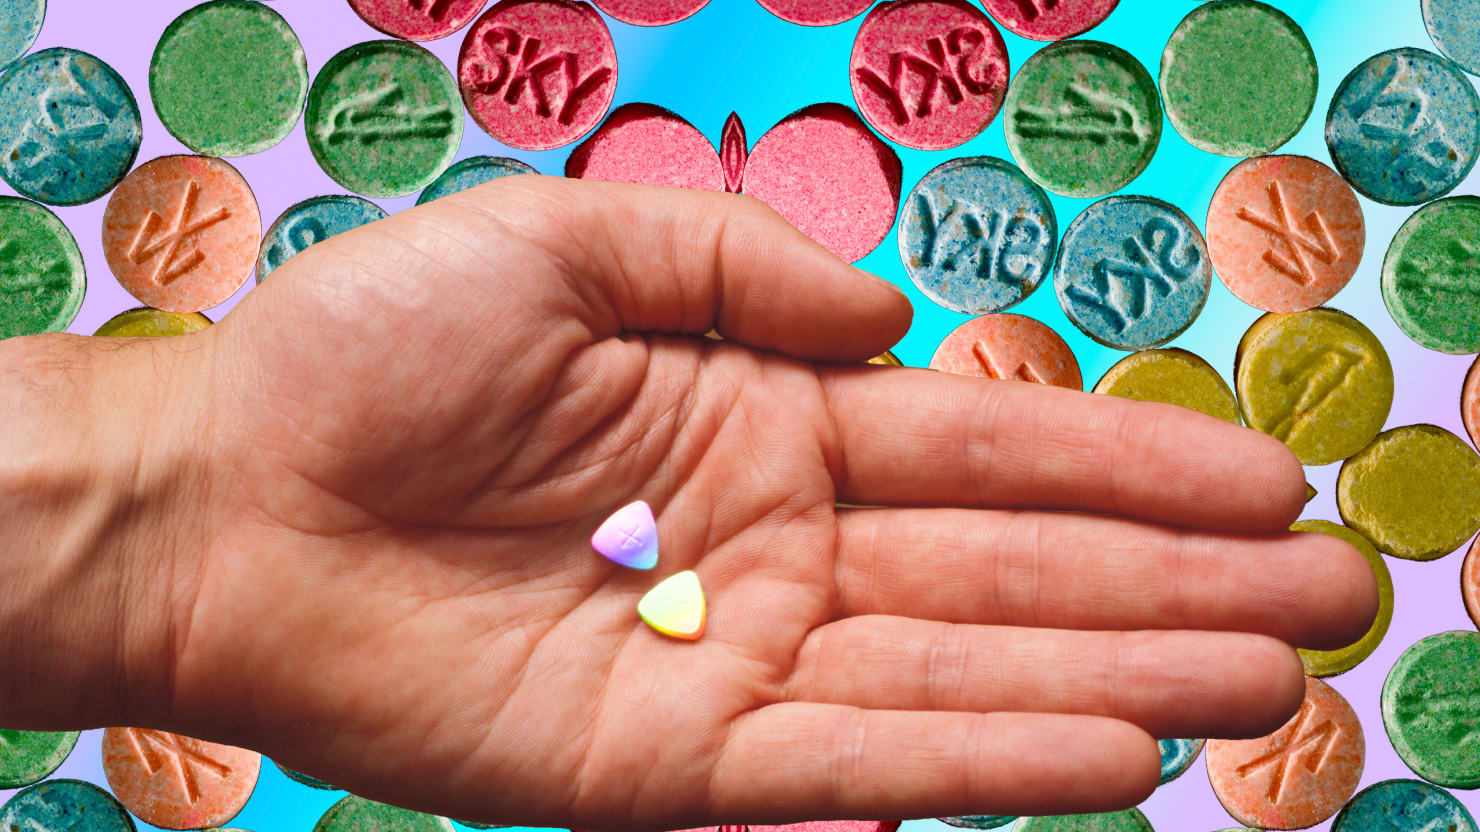 Can Ecstasy Replace Xanax? image